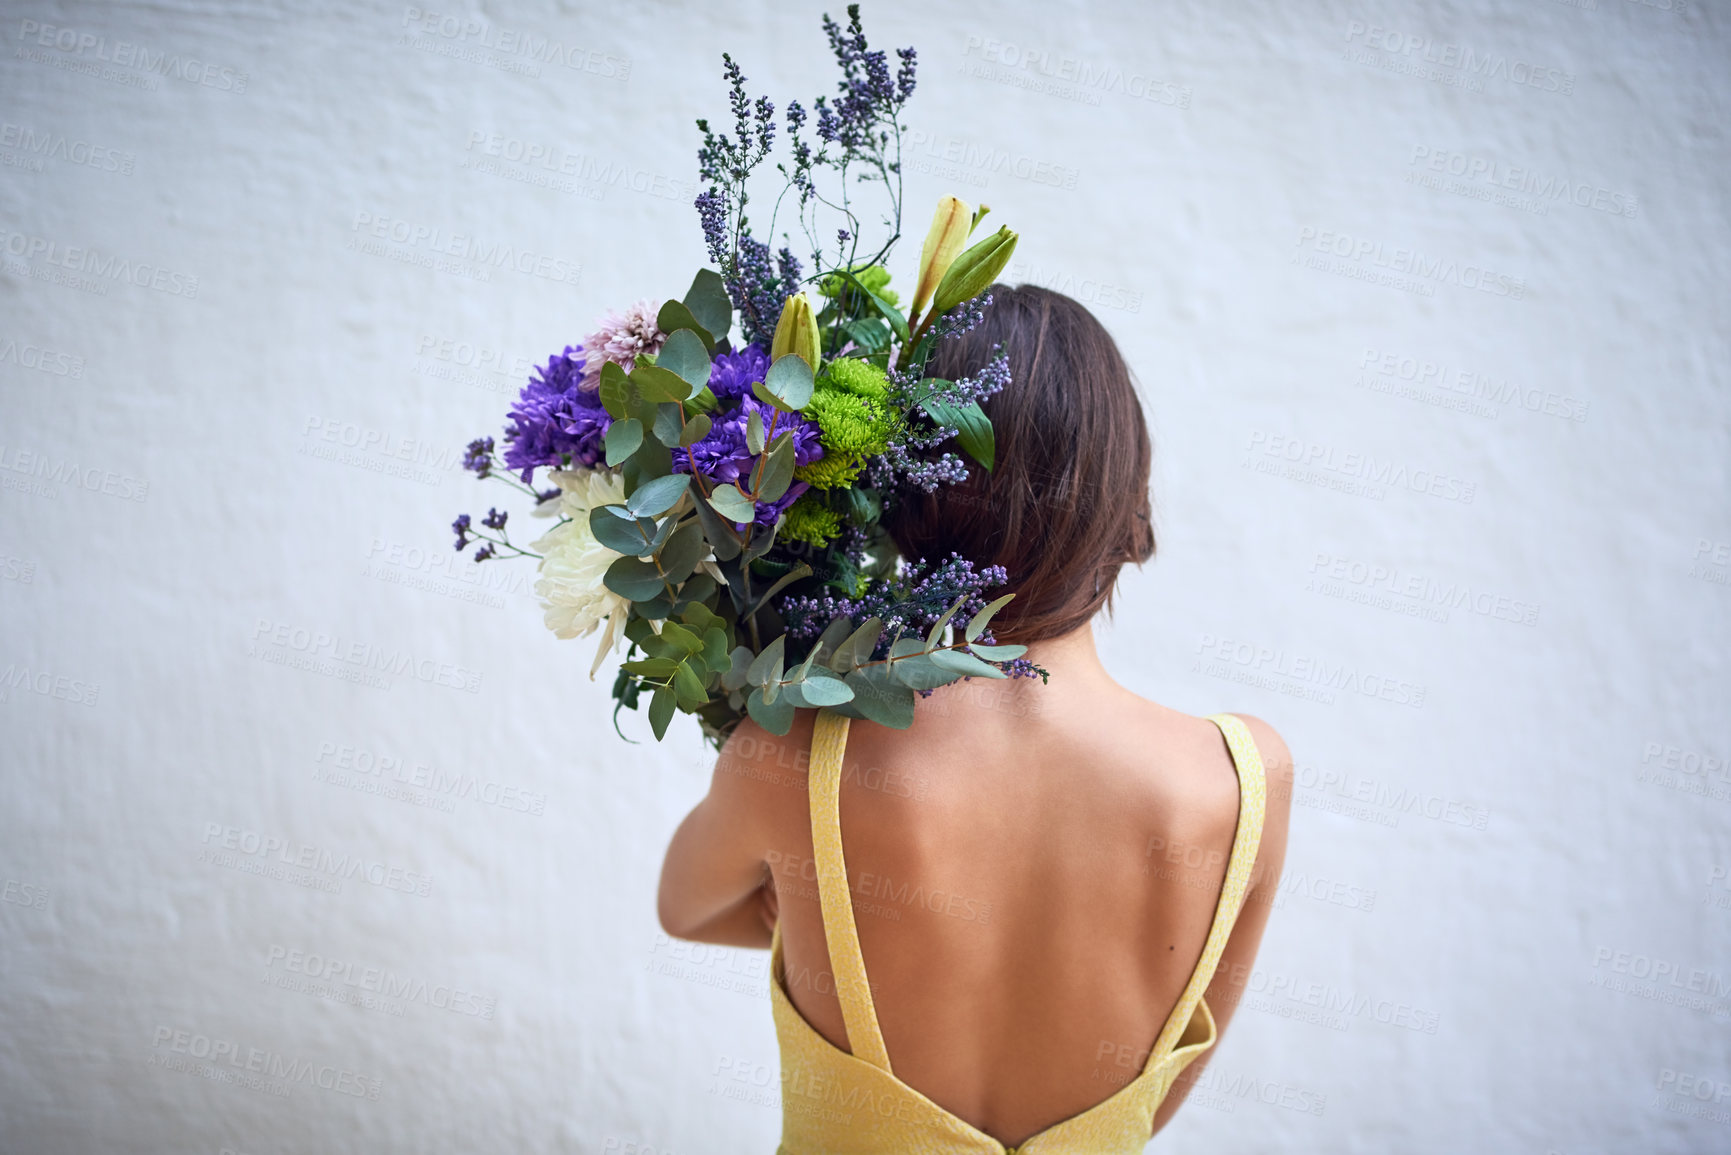 Buy stock photo Rearview studio shot of an unrecognizable woman holding a bouquet of flowers while standing against a grey background